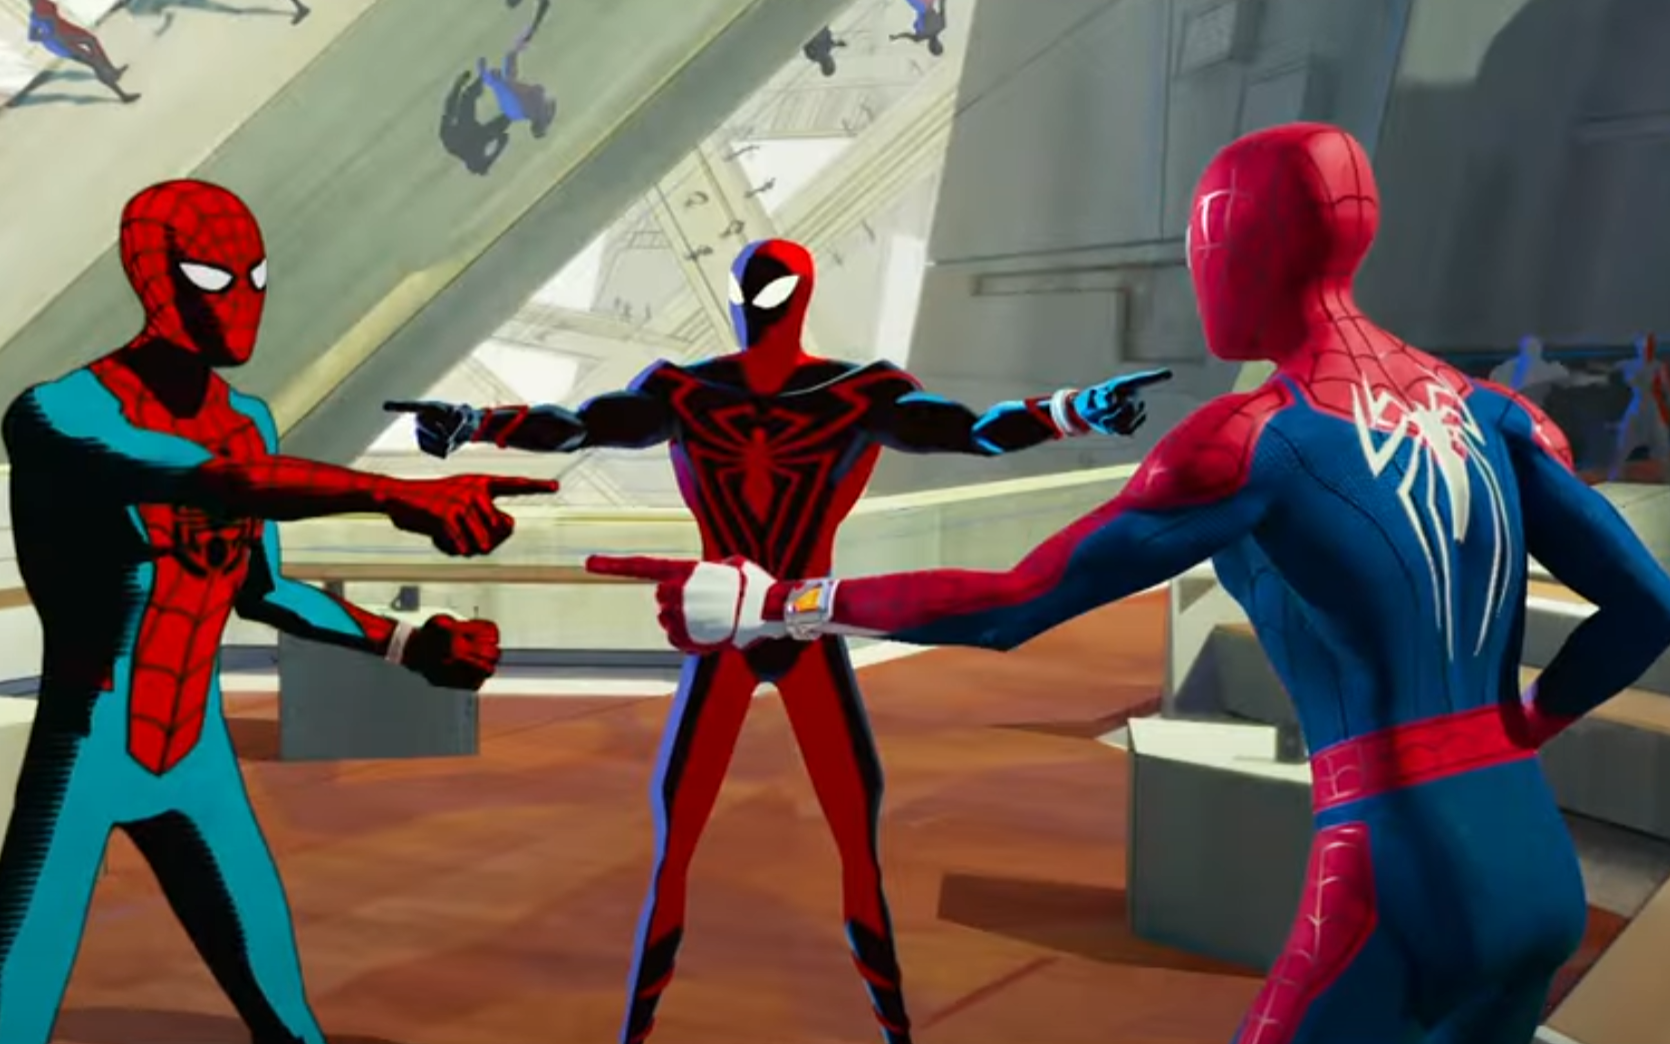 Image from one of the trailers for "Across the Spiderverse" featuring Spider-Man Unlimited, Marvel's Spider-Man and an unidentified Spider-Man.